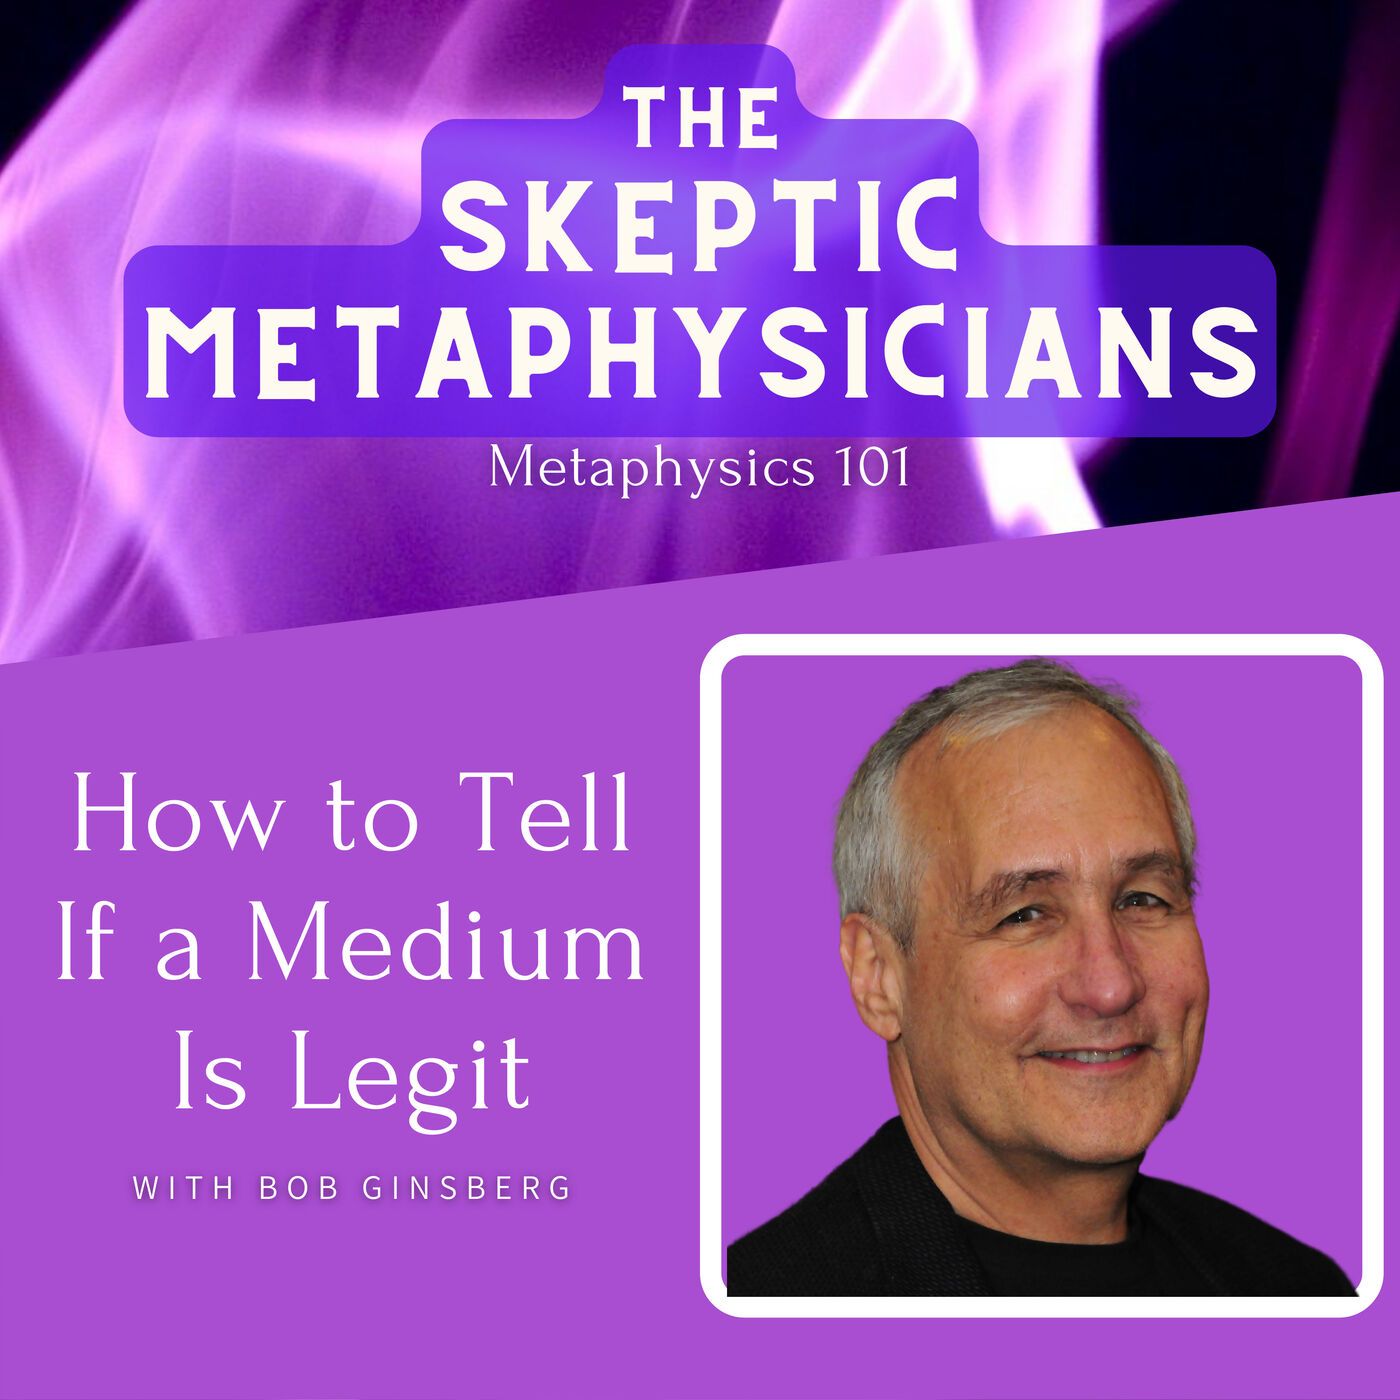 How to Tell If a Medium Is Legit | Bob Ginsberg Image